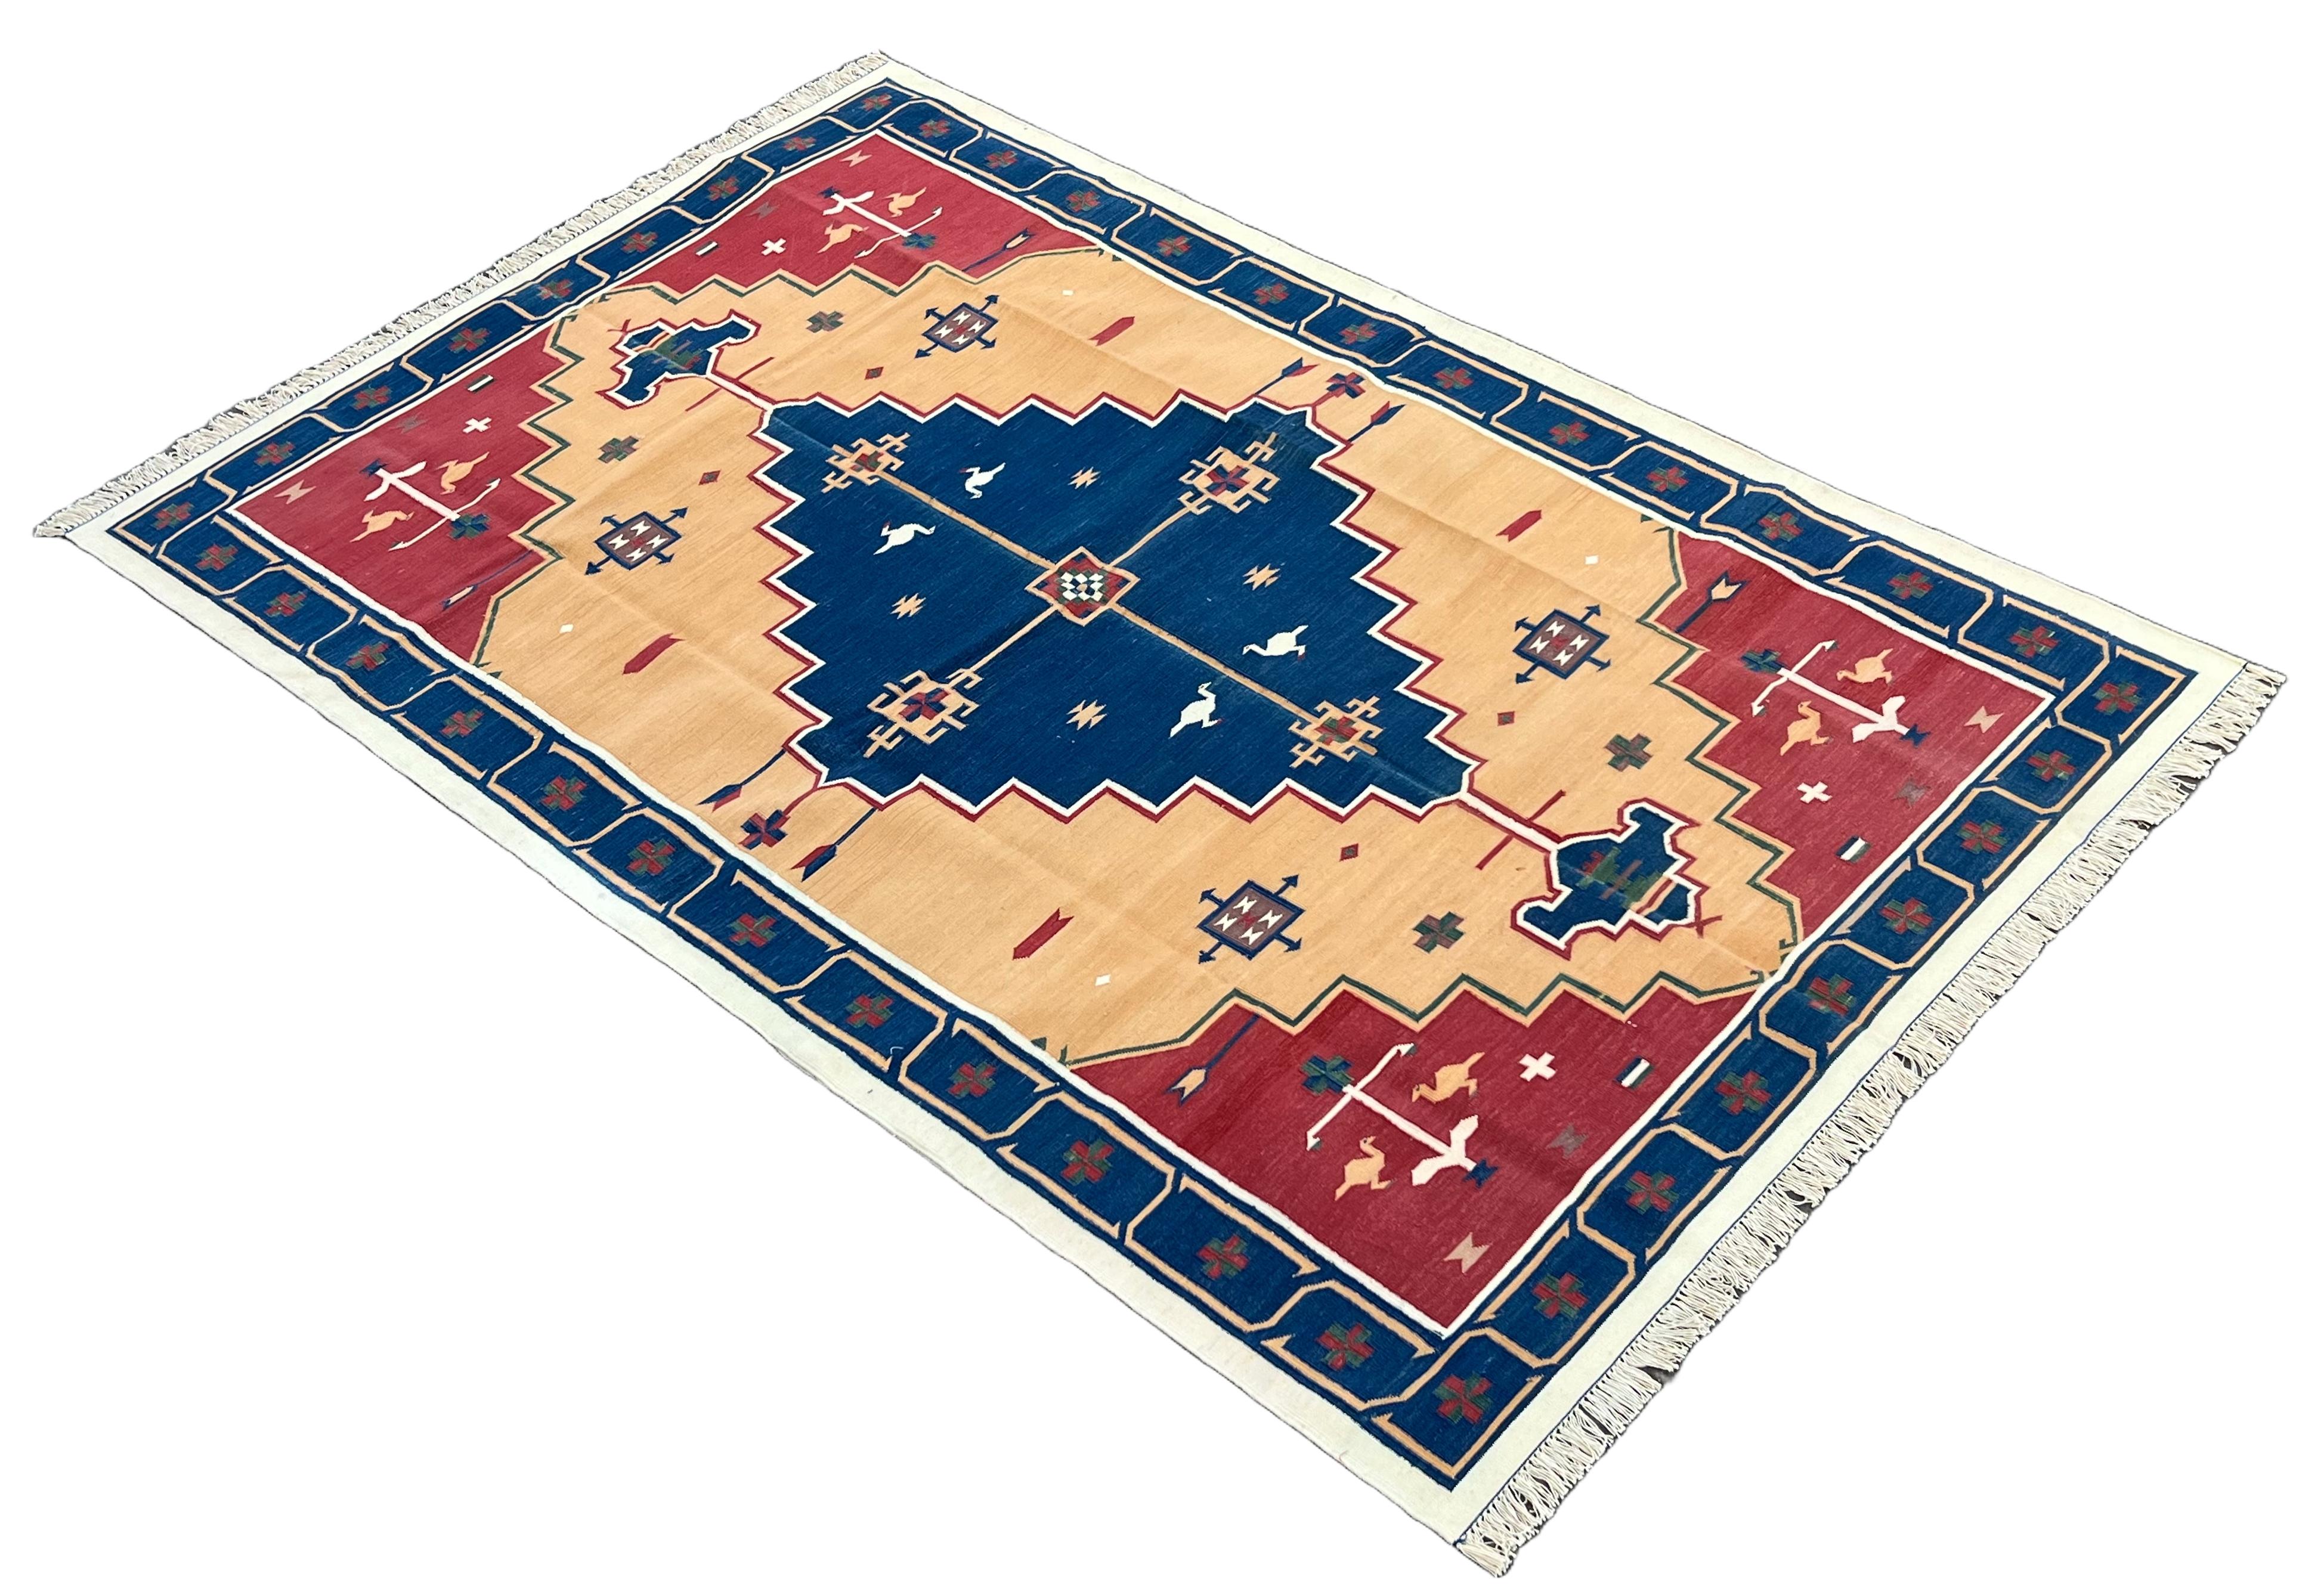 Cotton Vegetable Dyed Blue And Red Geometric Indian Dhurrie Rug-5'x8'

These special flat-weave dhurries are hand-woven with 15 ply 100% cotton yarn. Due to the special manufacturing techniques used to create our rugs, the size and color of each